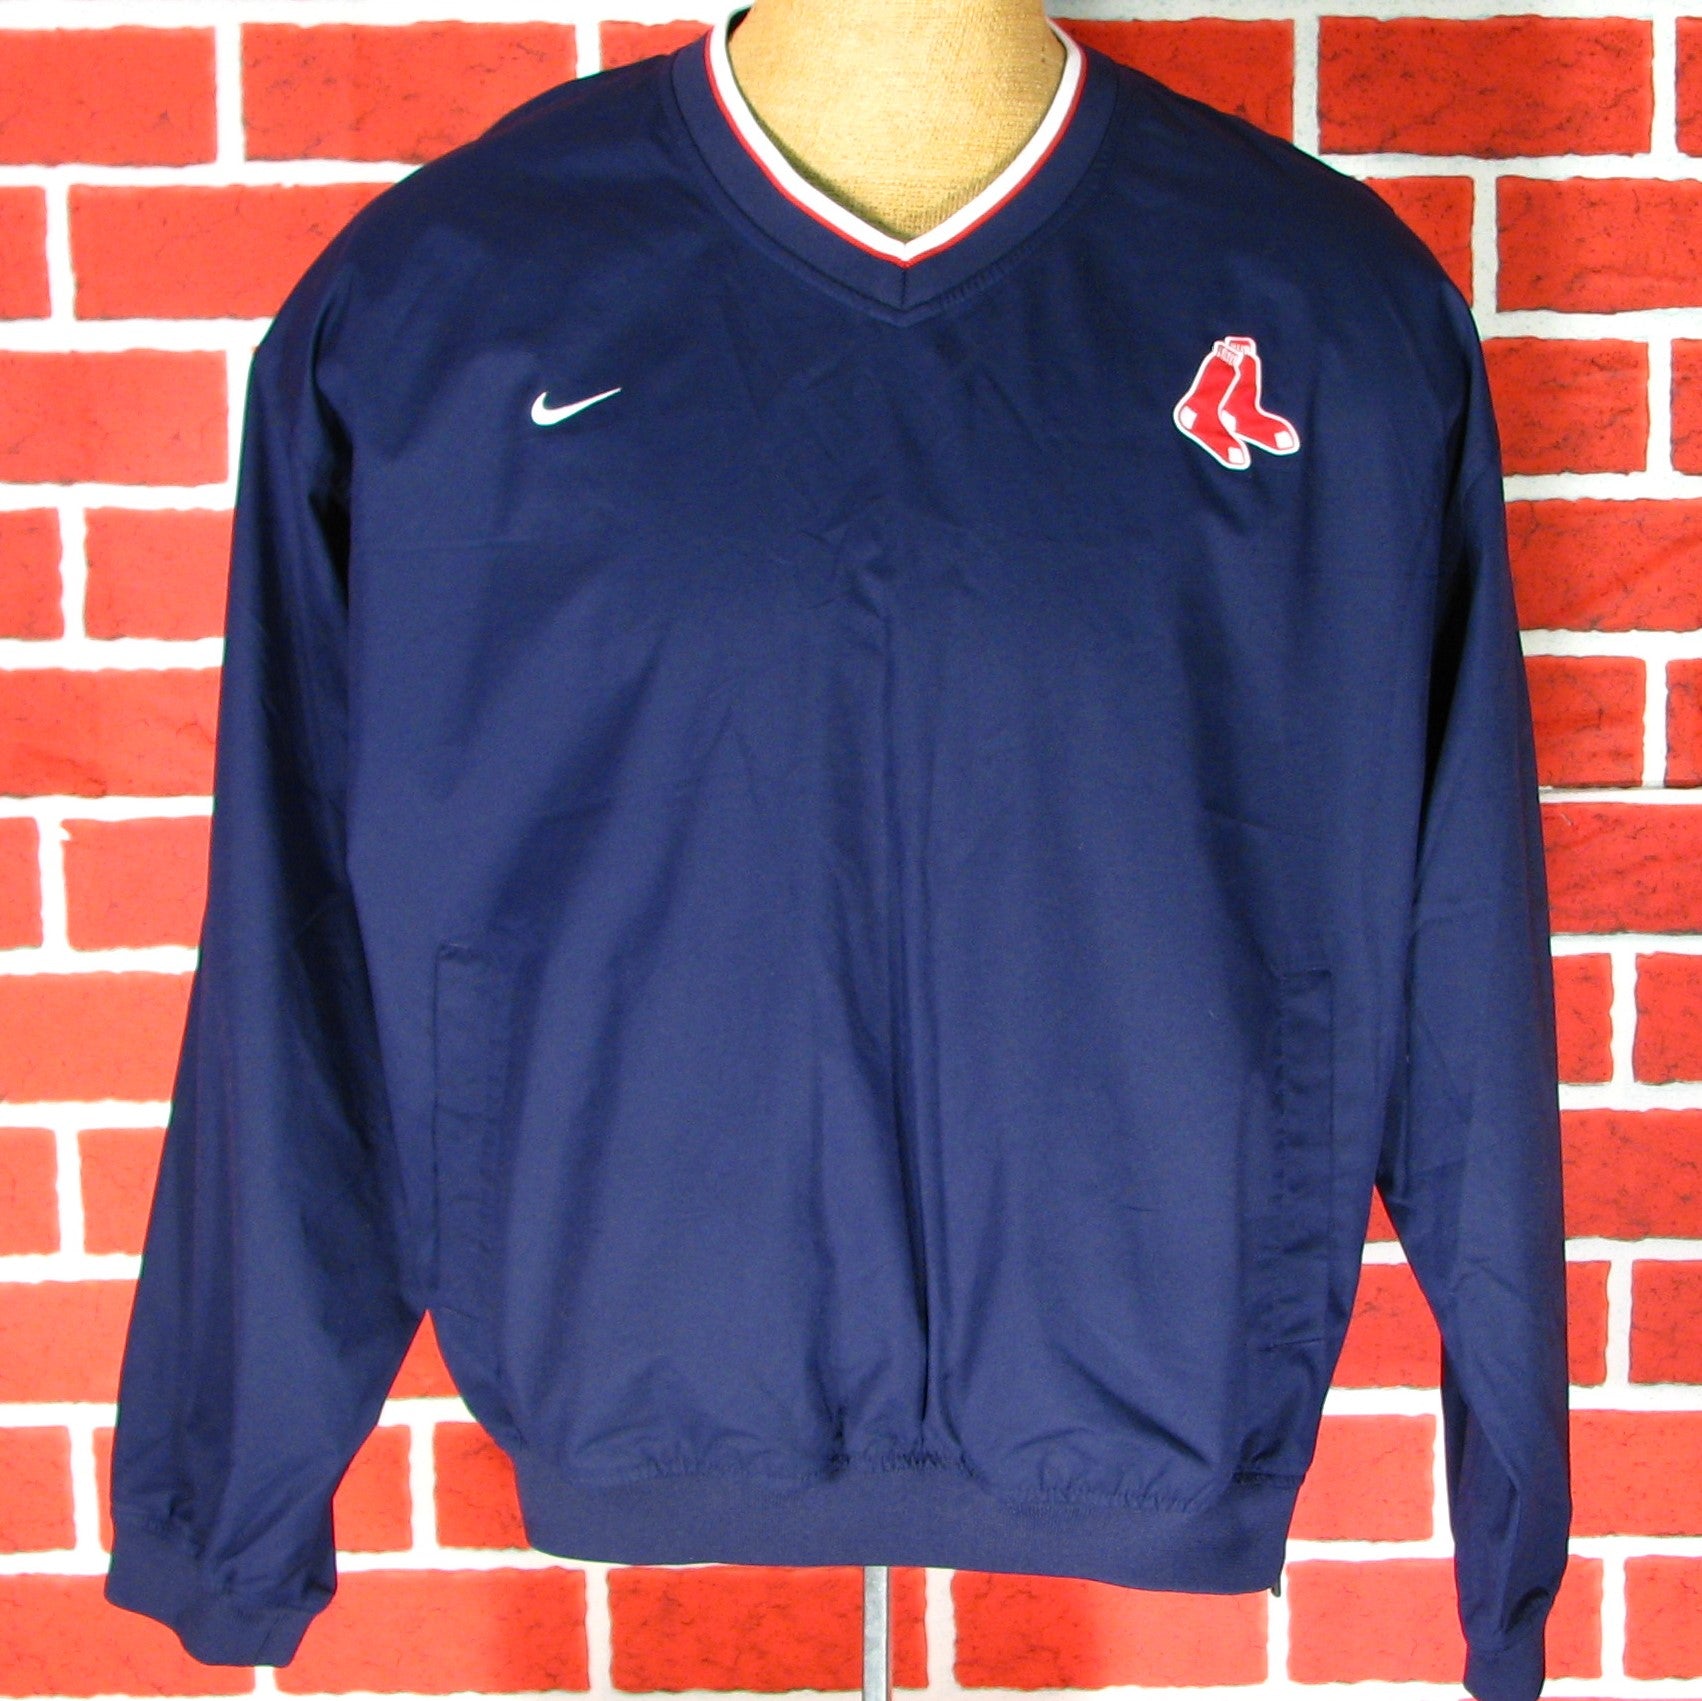 red sox pullover jersey